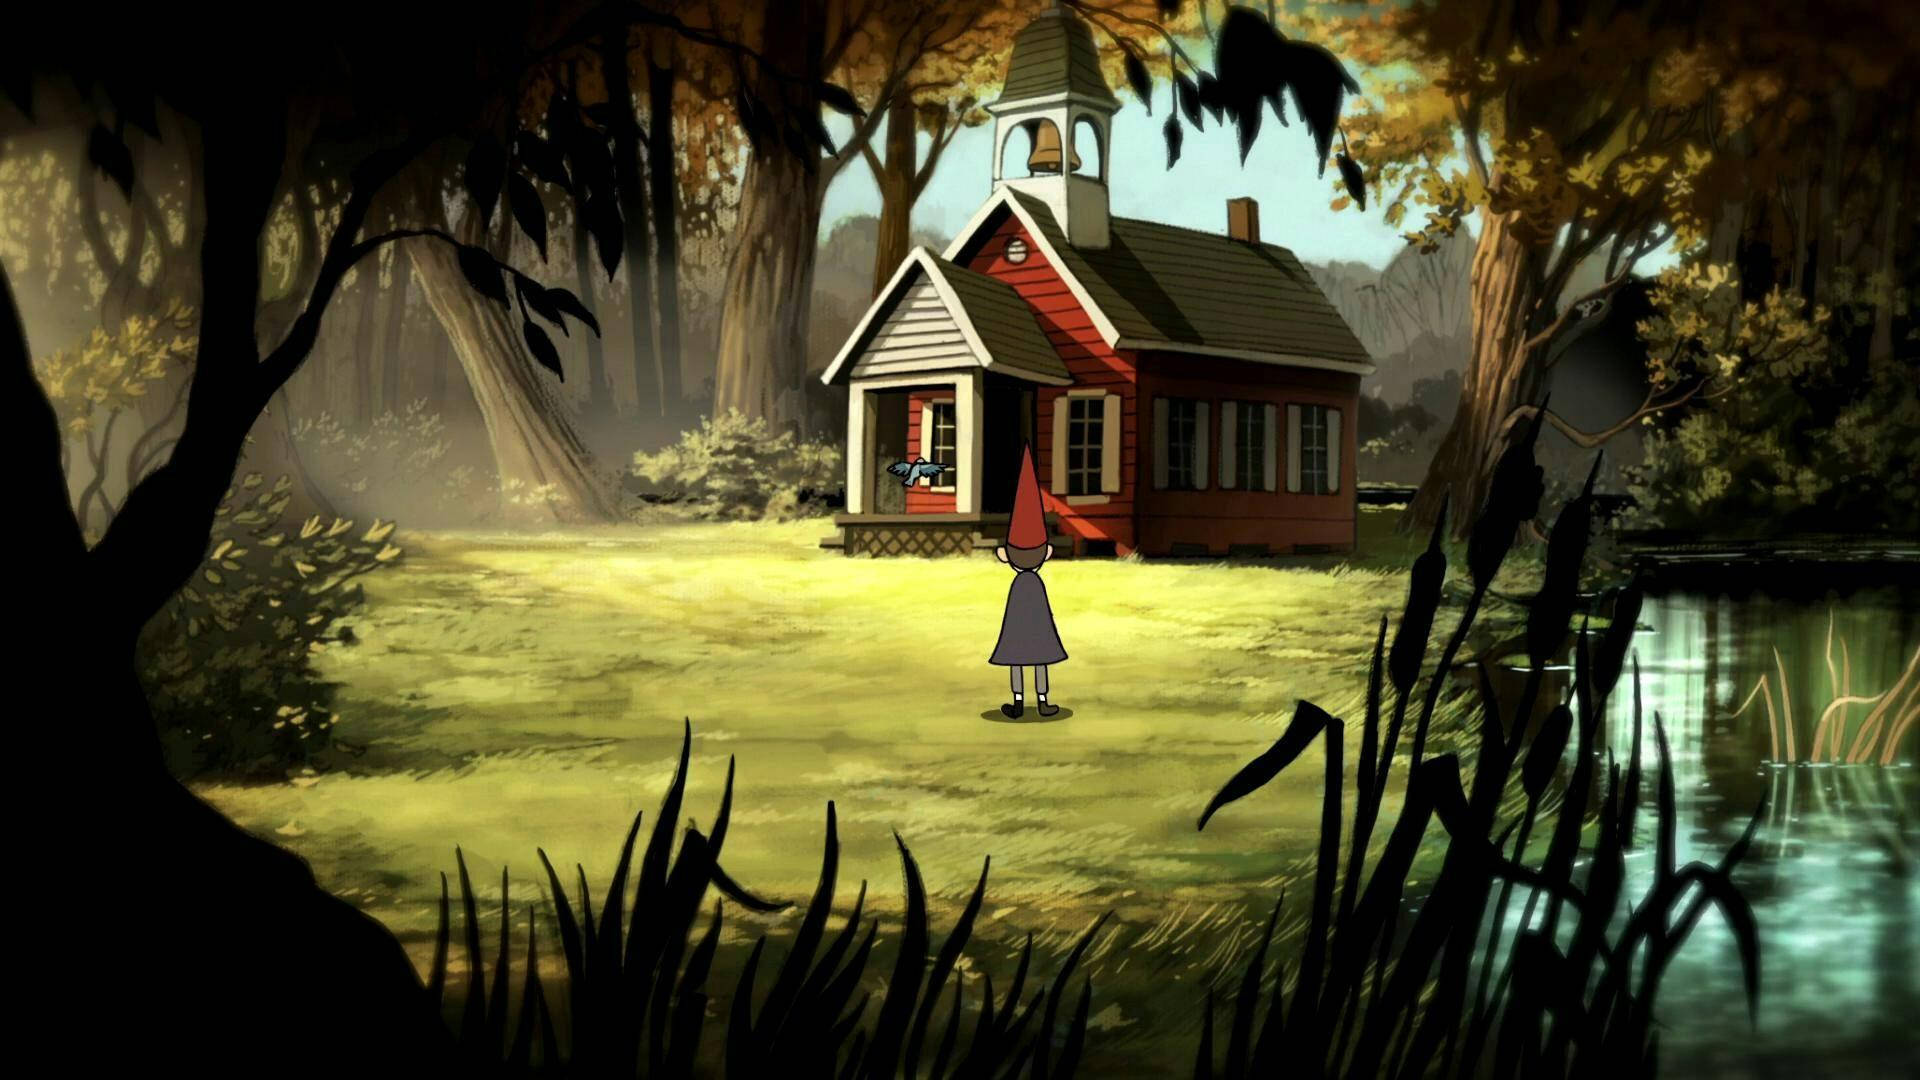 Wirt Looking At House Over The Garden Wall Background